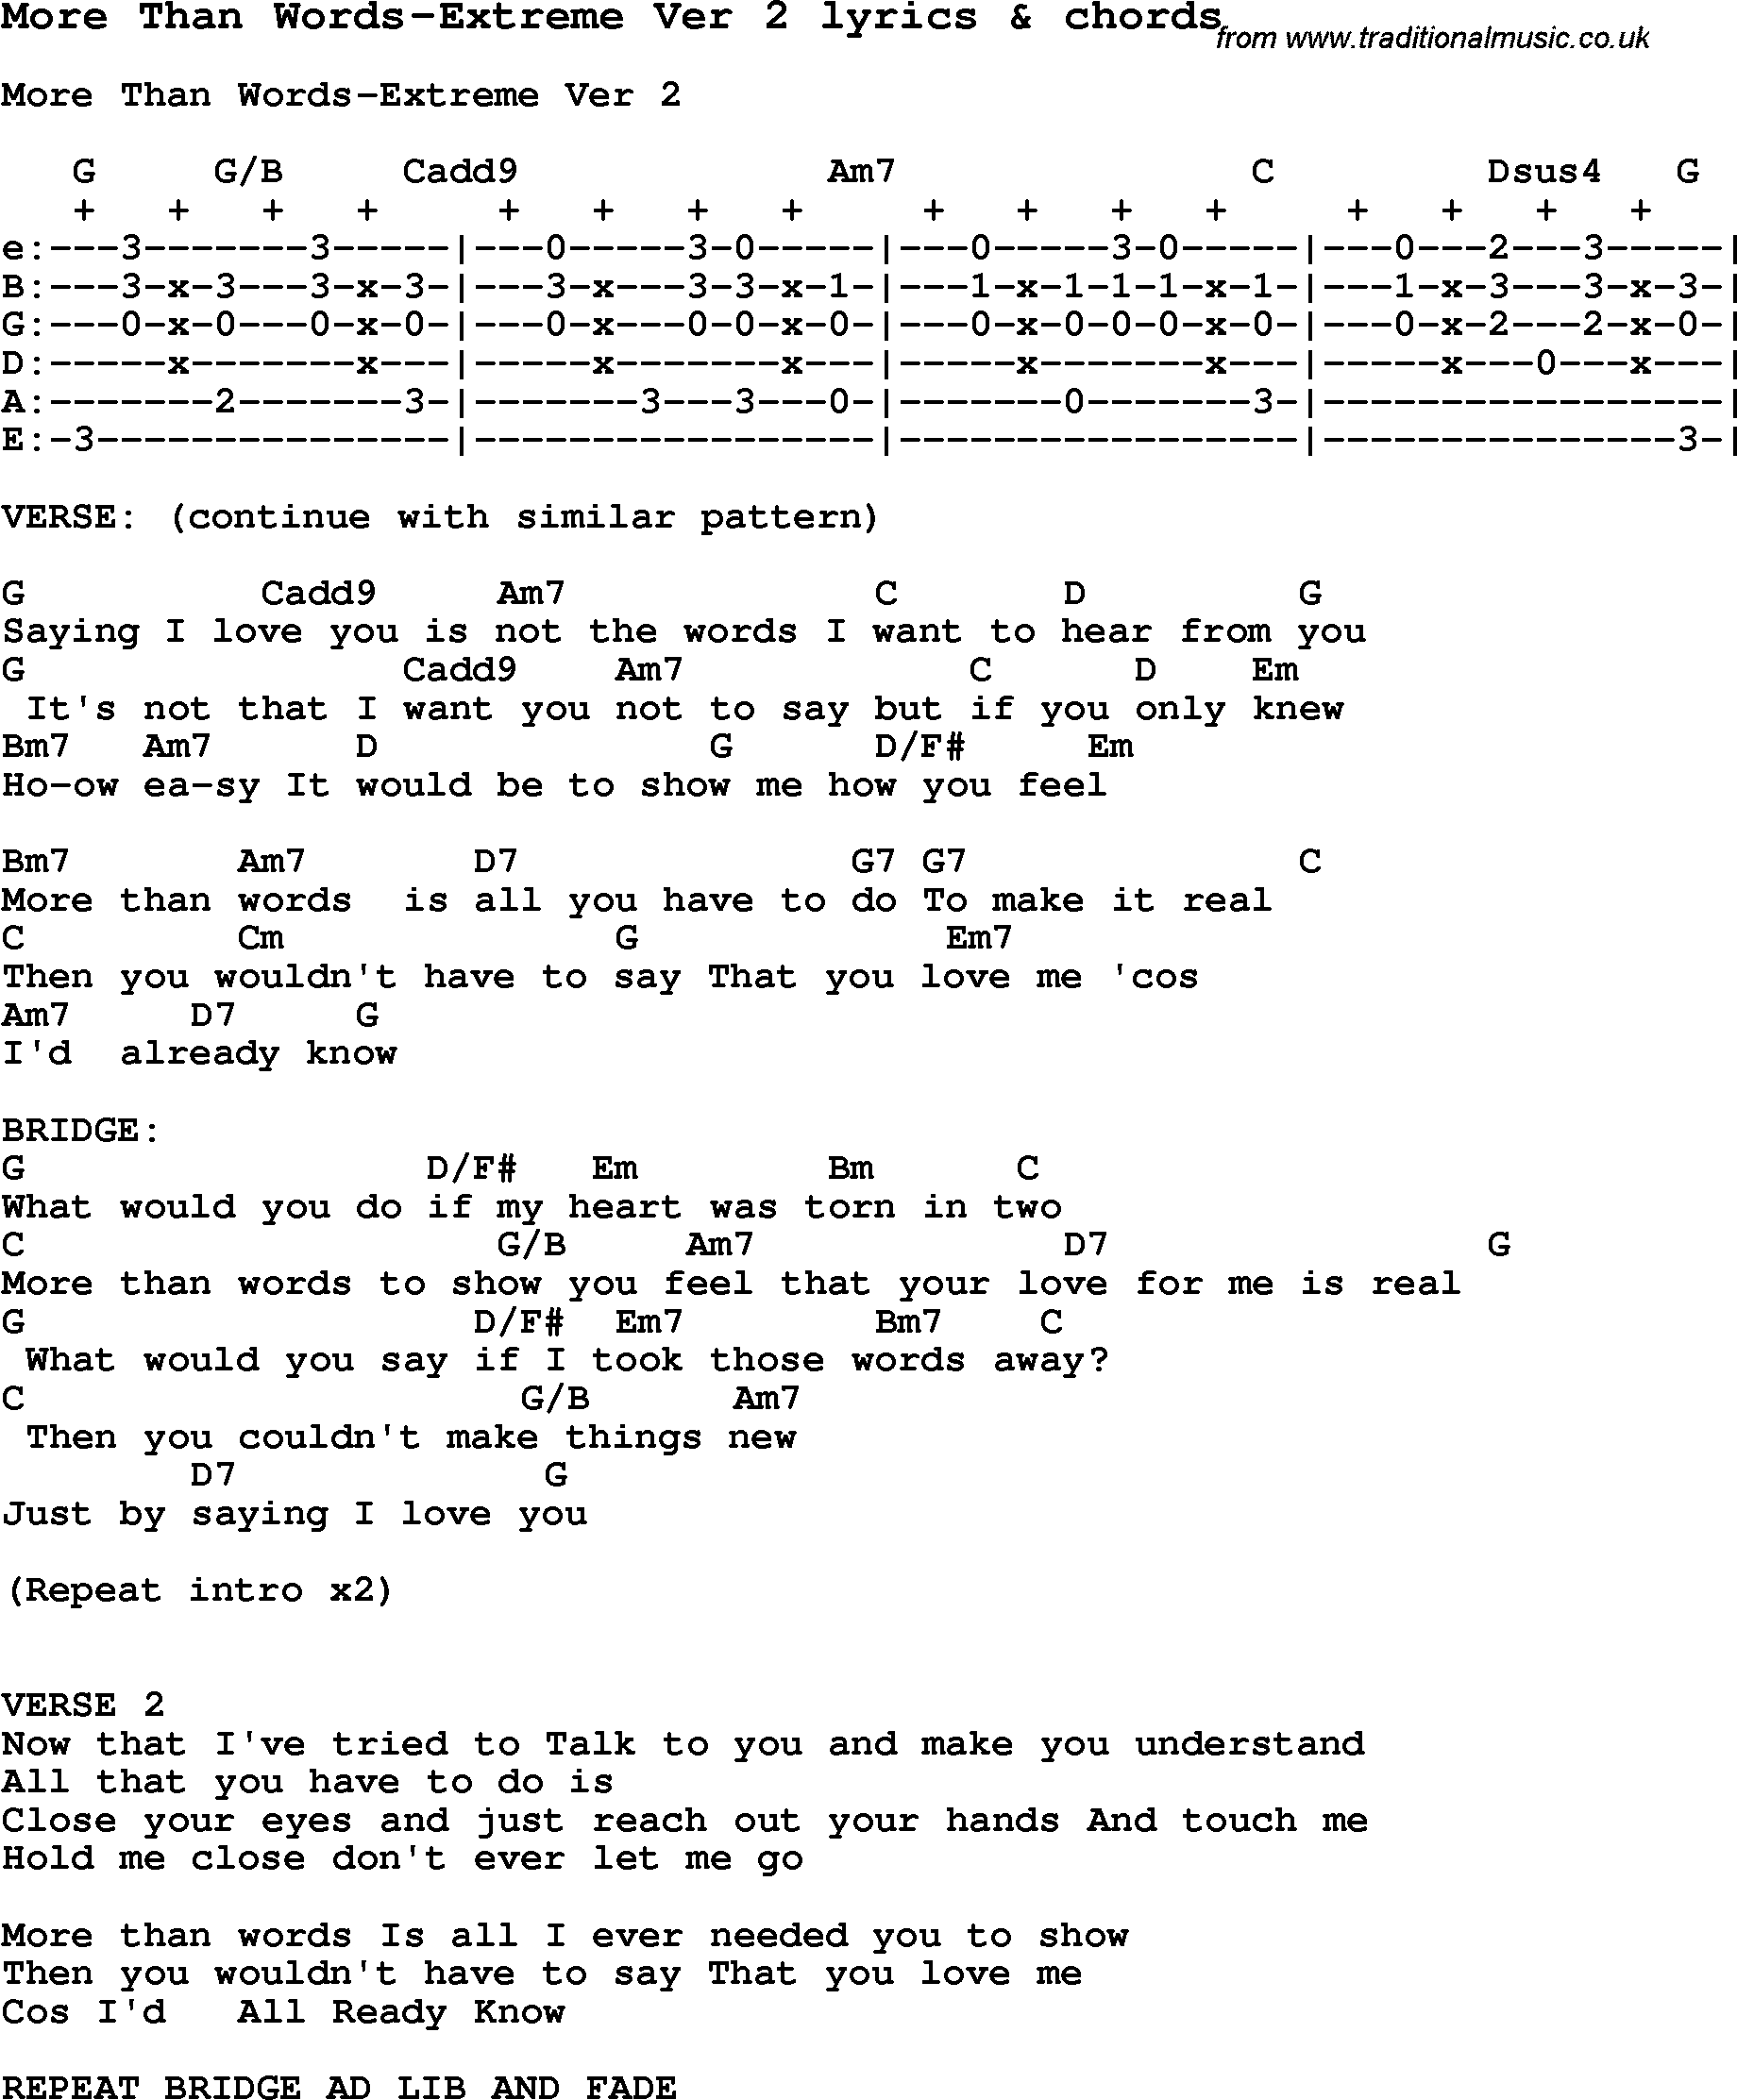 Love Song Lyrics for: More Than Words-Extreme Ver 2 with chords for Ukulele, Guitar Banjo etc.